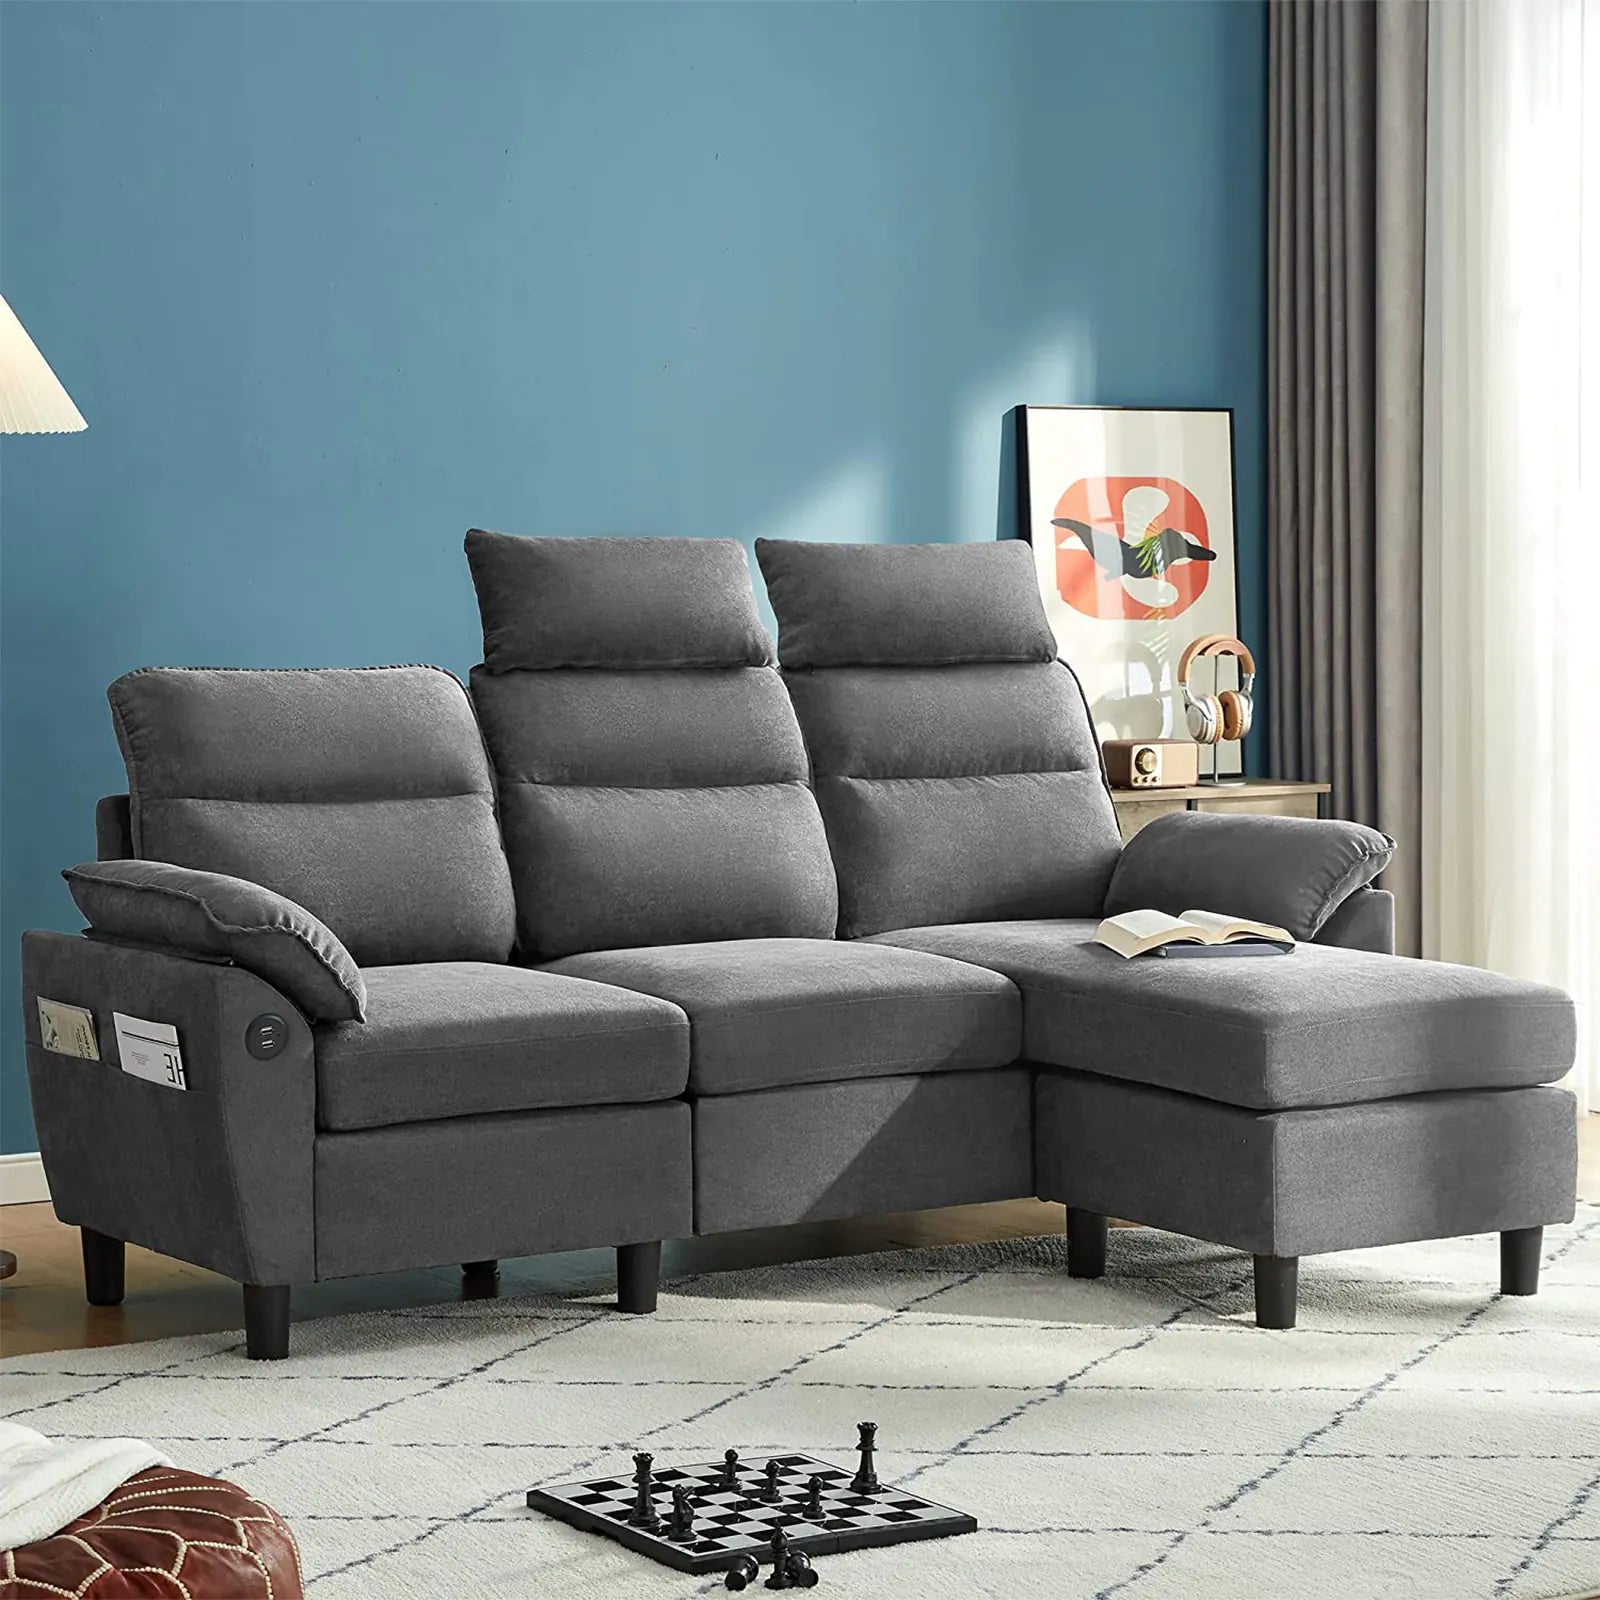 Convertible Sectional Sofa with 2 USB Ports and Storage Bags